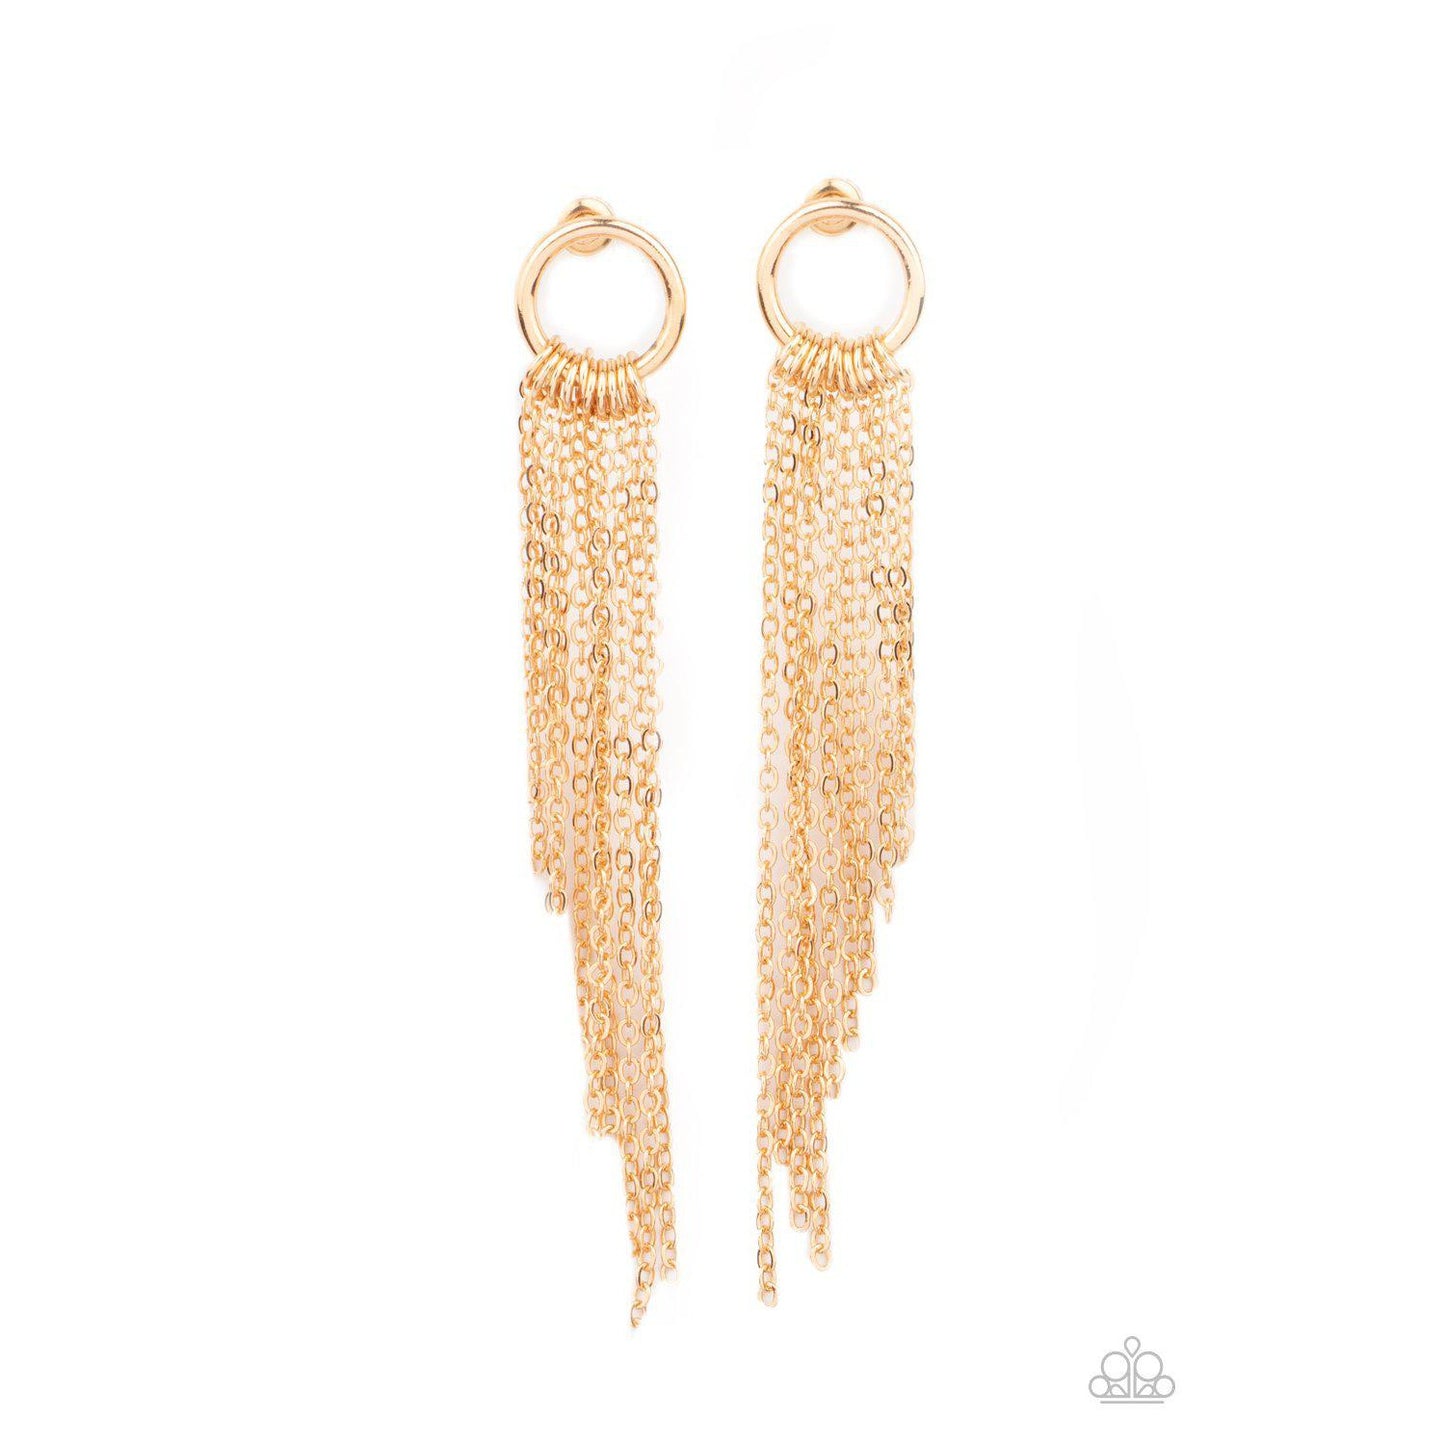 Divinely Dipping - Gold Chain Fringe Earrings  - A Large Selection Hand-Chains And Jewelry On rainbowartsreview,Women's Jewelry | Necklaces, Earrings, Bracelets